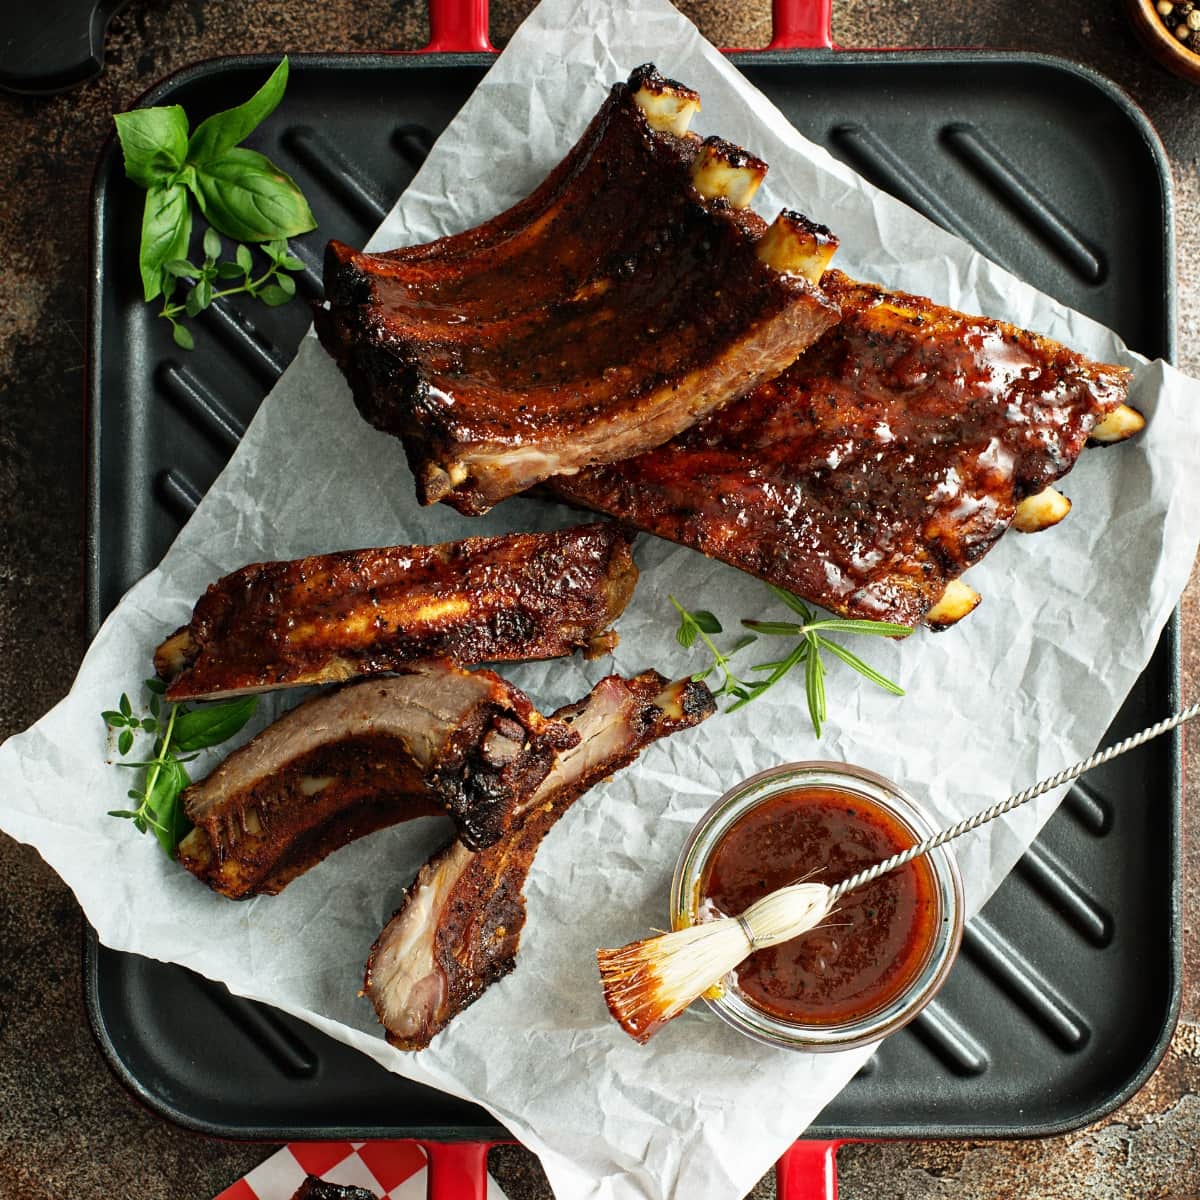 Different Types of Ribs Explained featuring Top View of Cooked, Bone-In Ribs with Barbecue Sauce on Parchment and a Cast Iron Grill